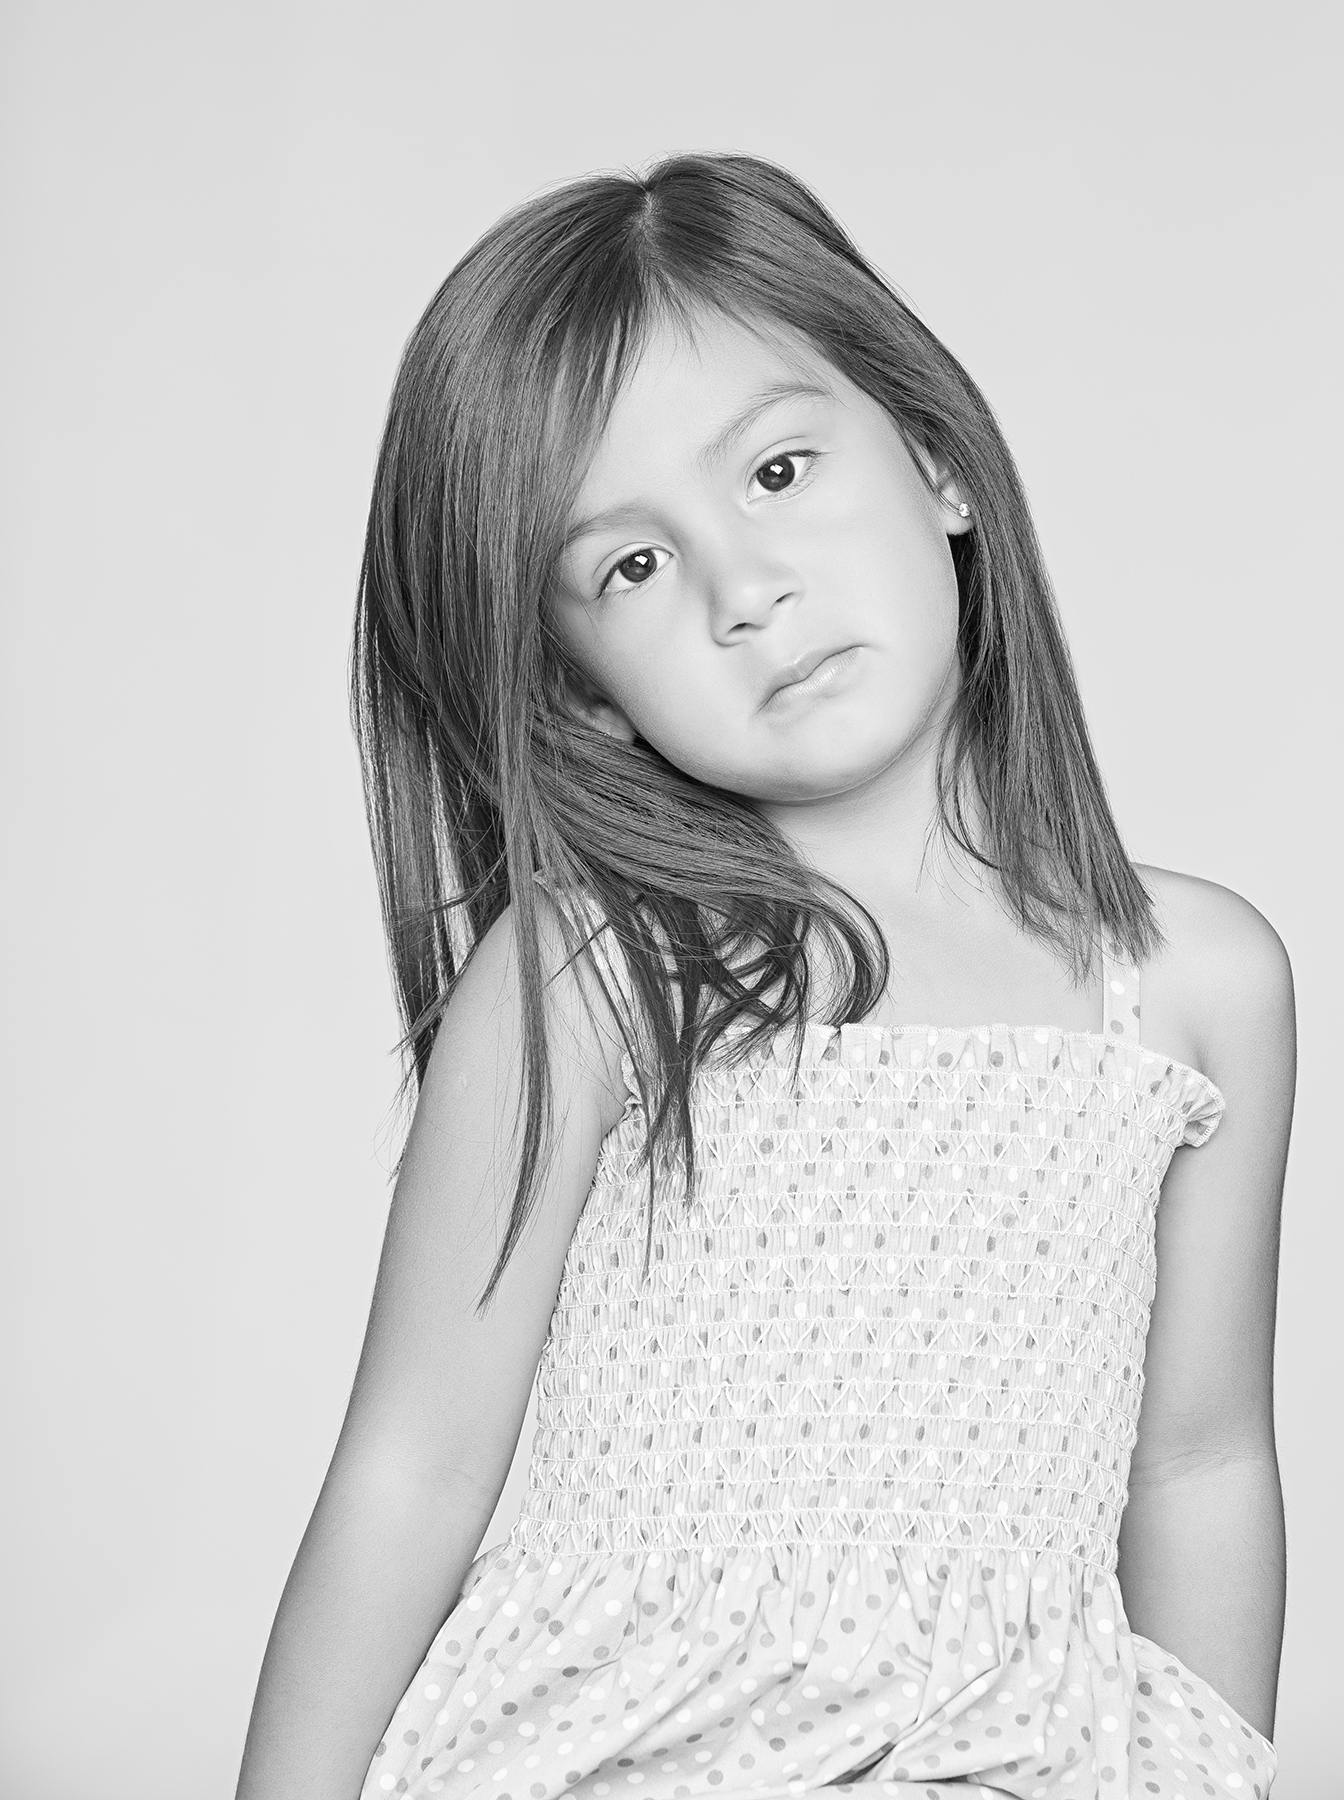  close up photography portrait of a young girl in black and white on a white background